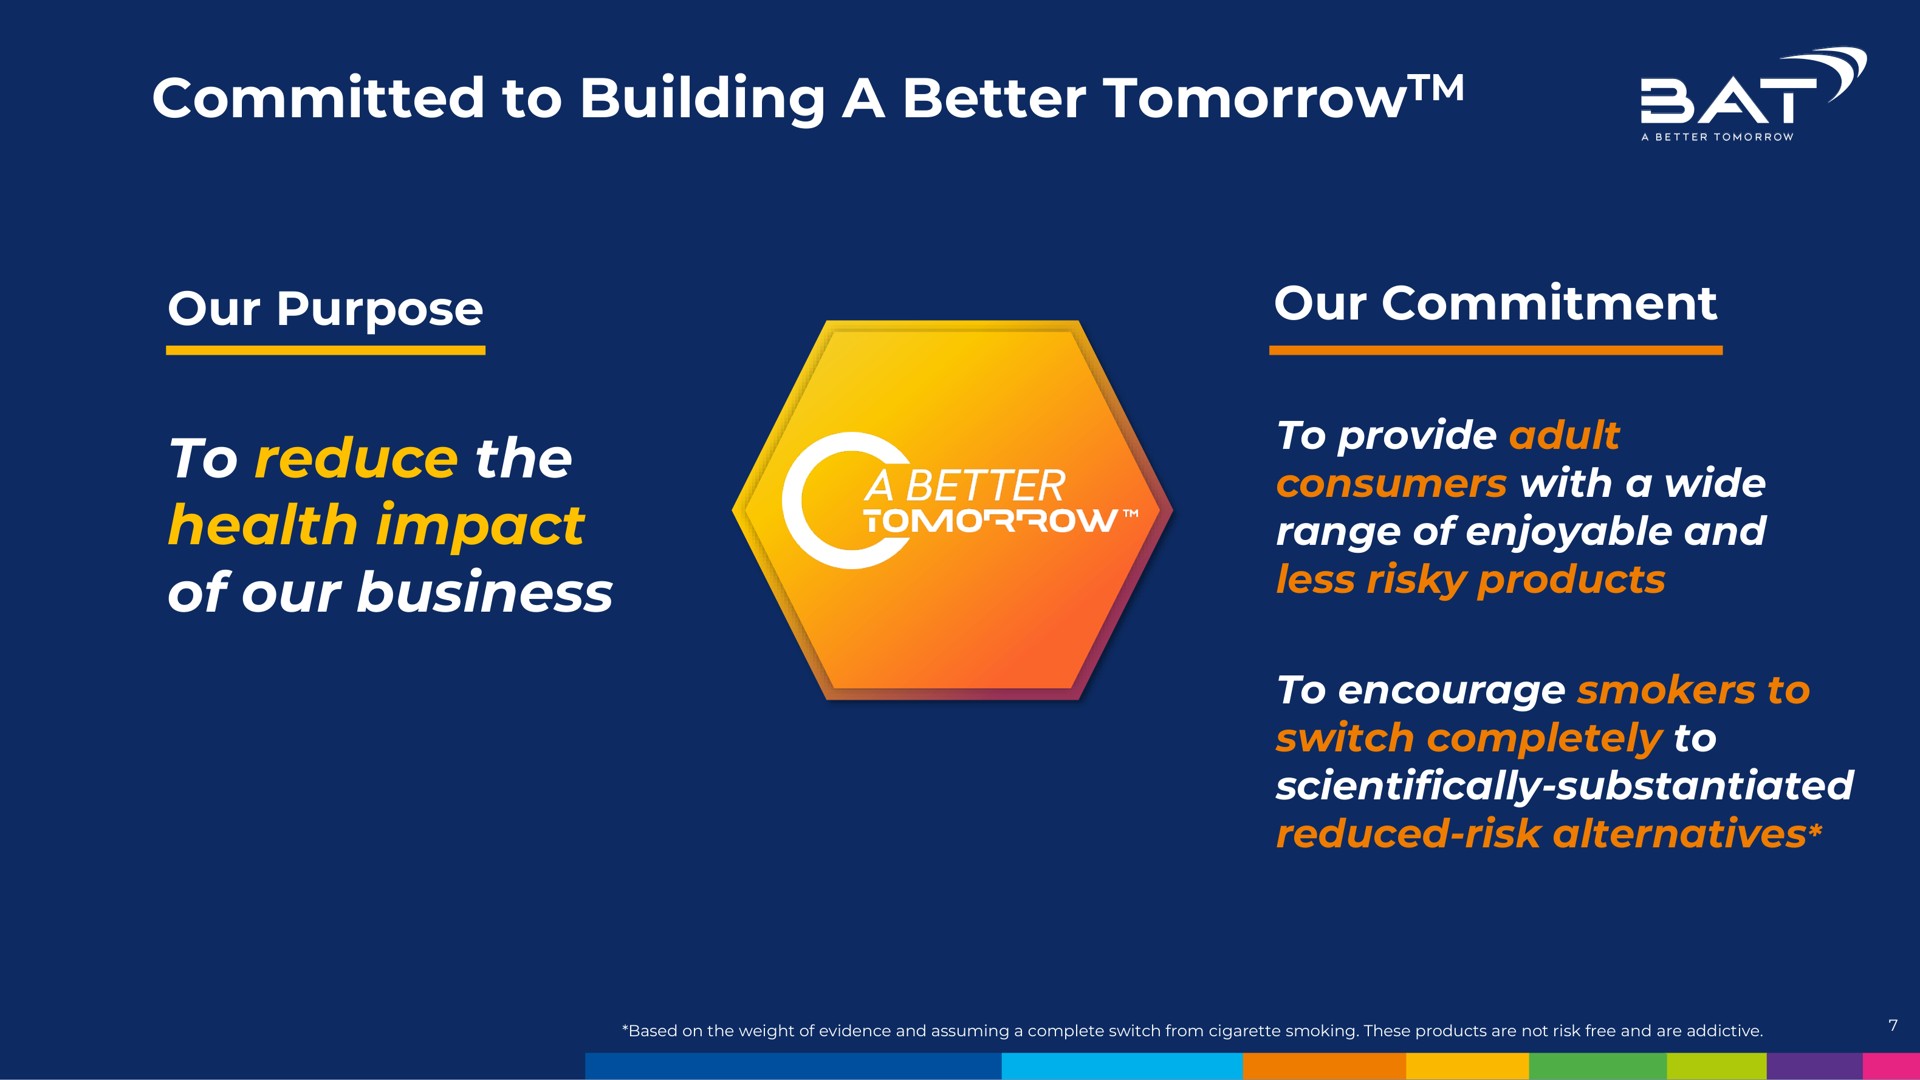 committed to building a better to reduce the health impact of our business tomorrow nam | BAT